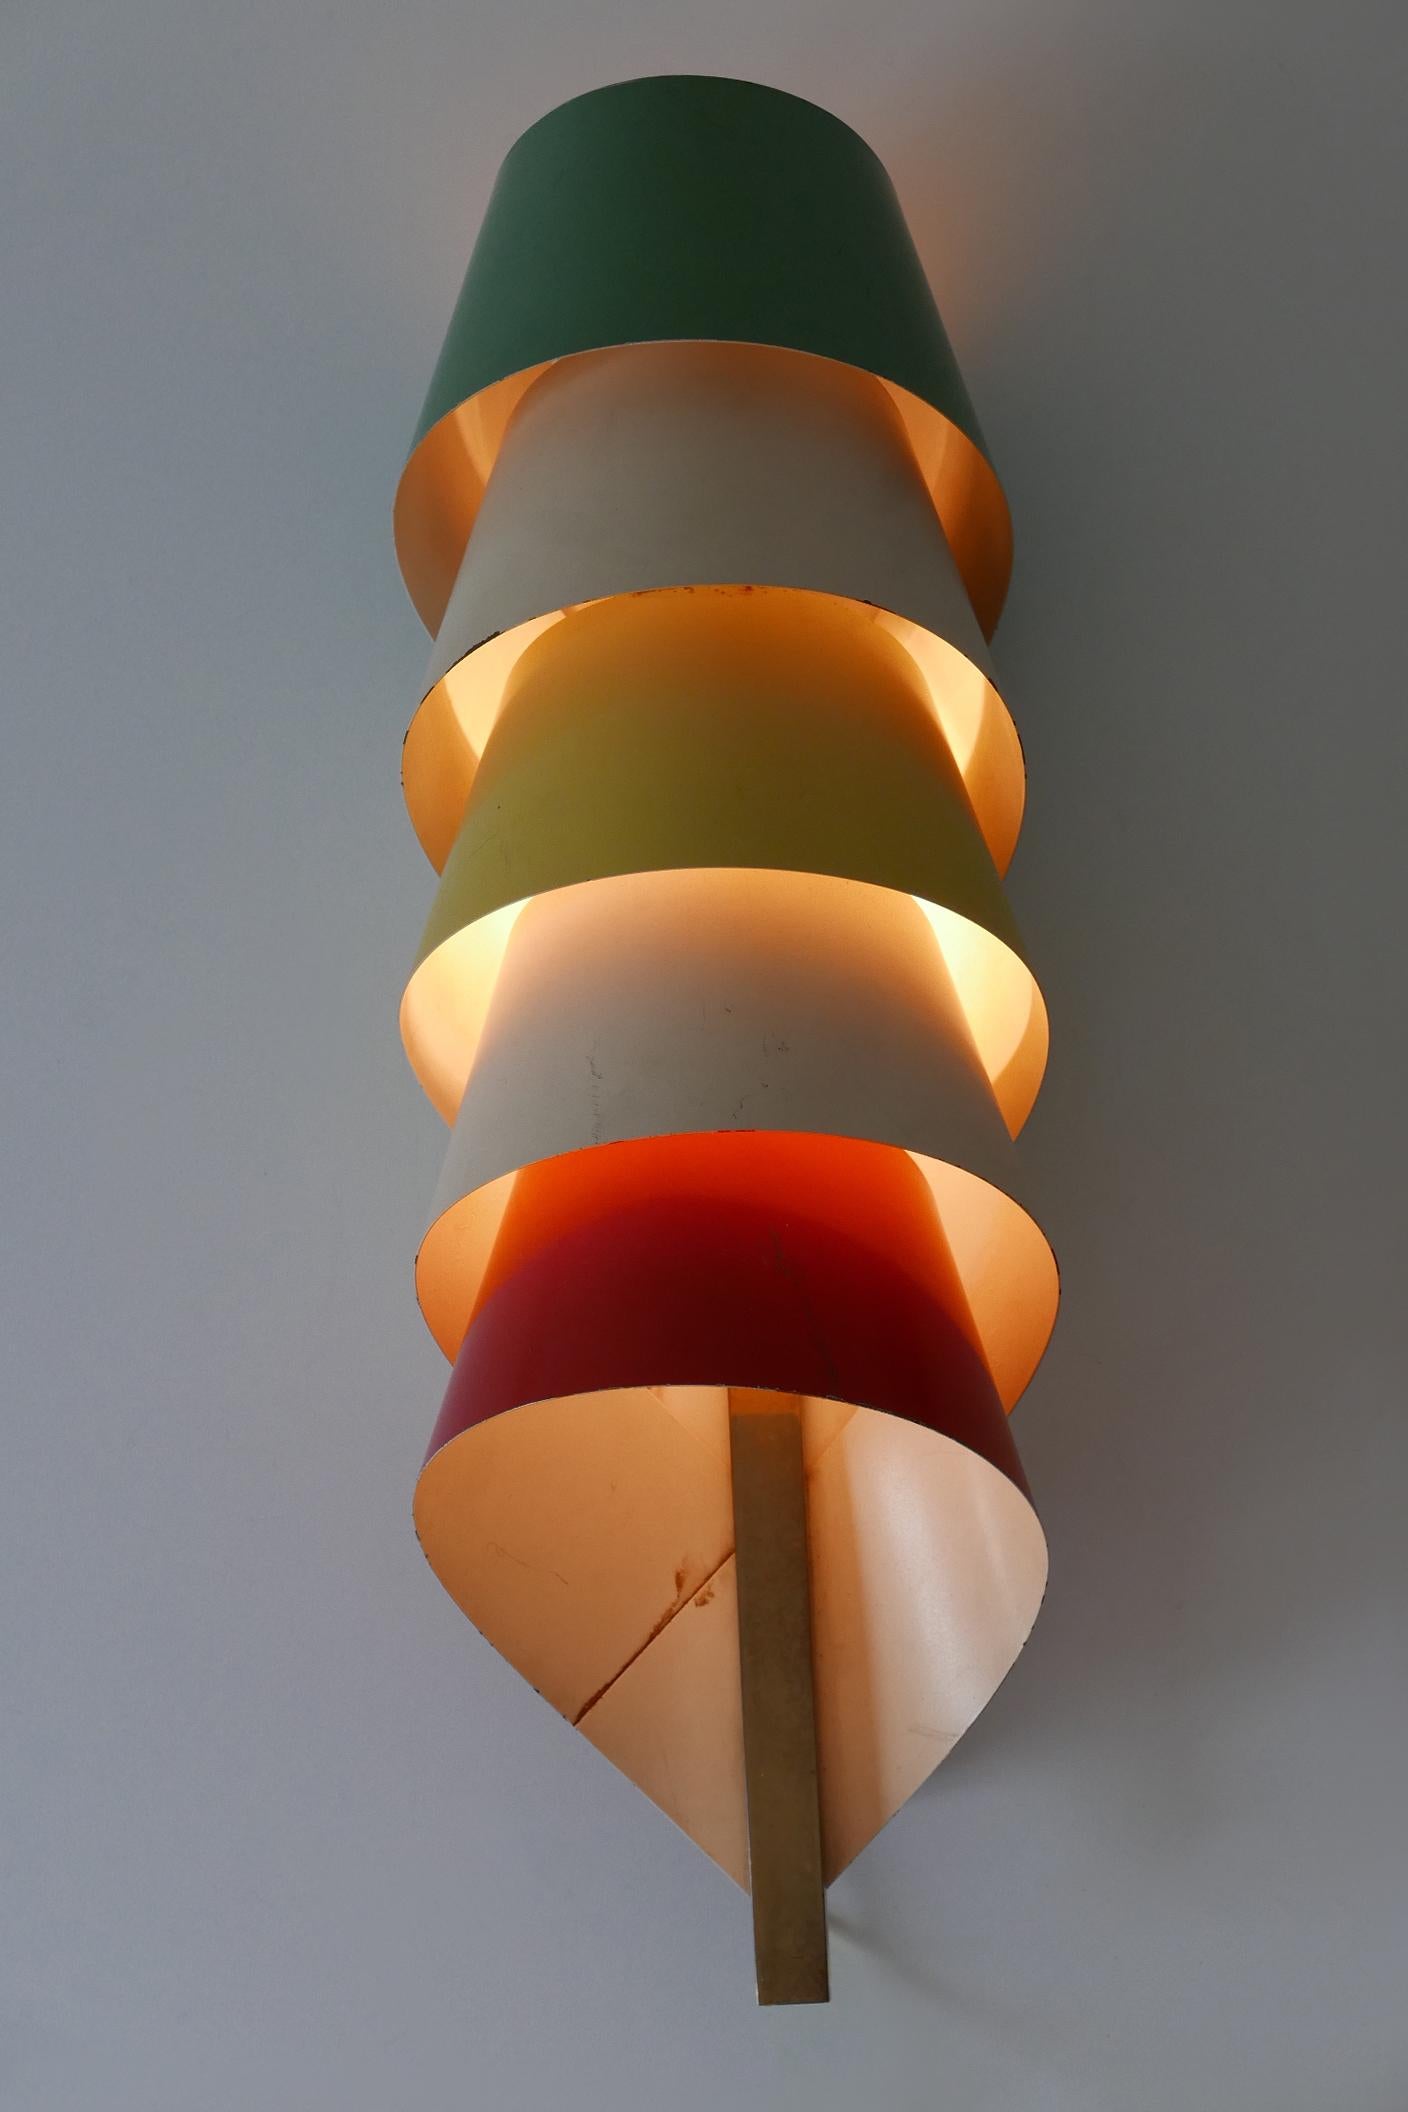 Rare & Decorative Mid-Century Modern Sconce or Wall Lamp Scandinavia 1950s For Sale 2